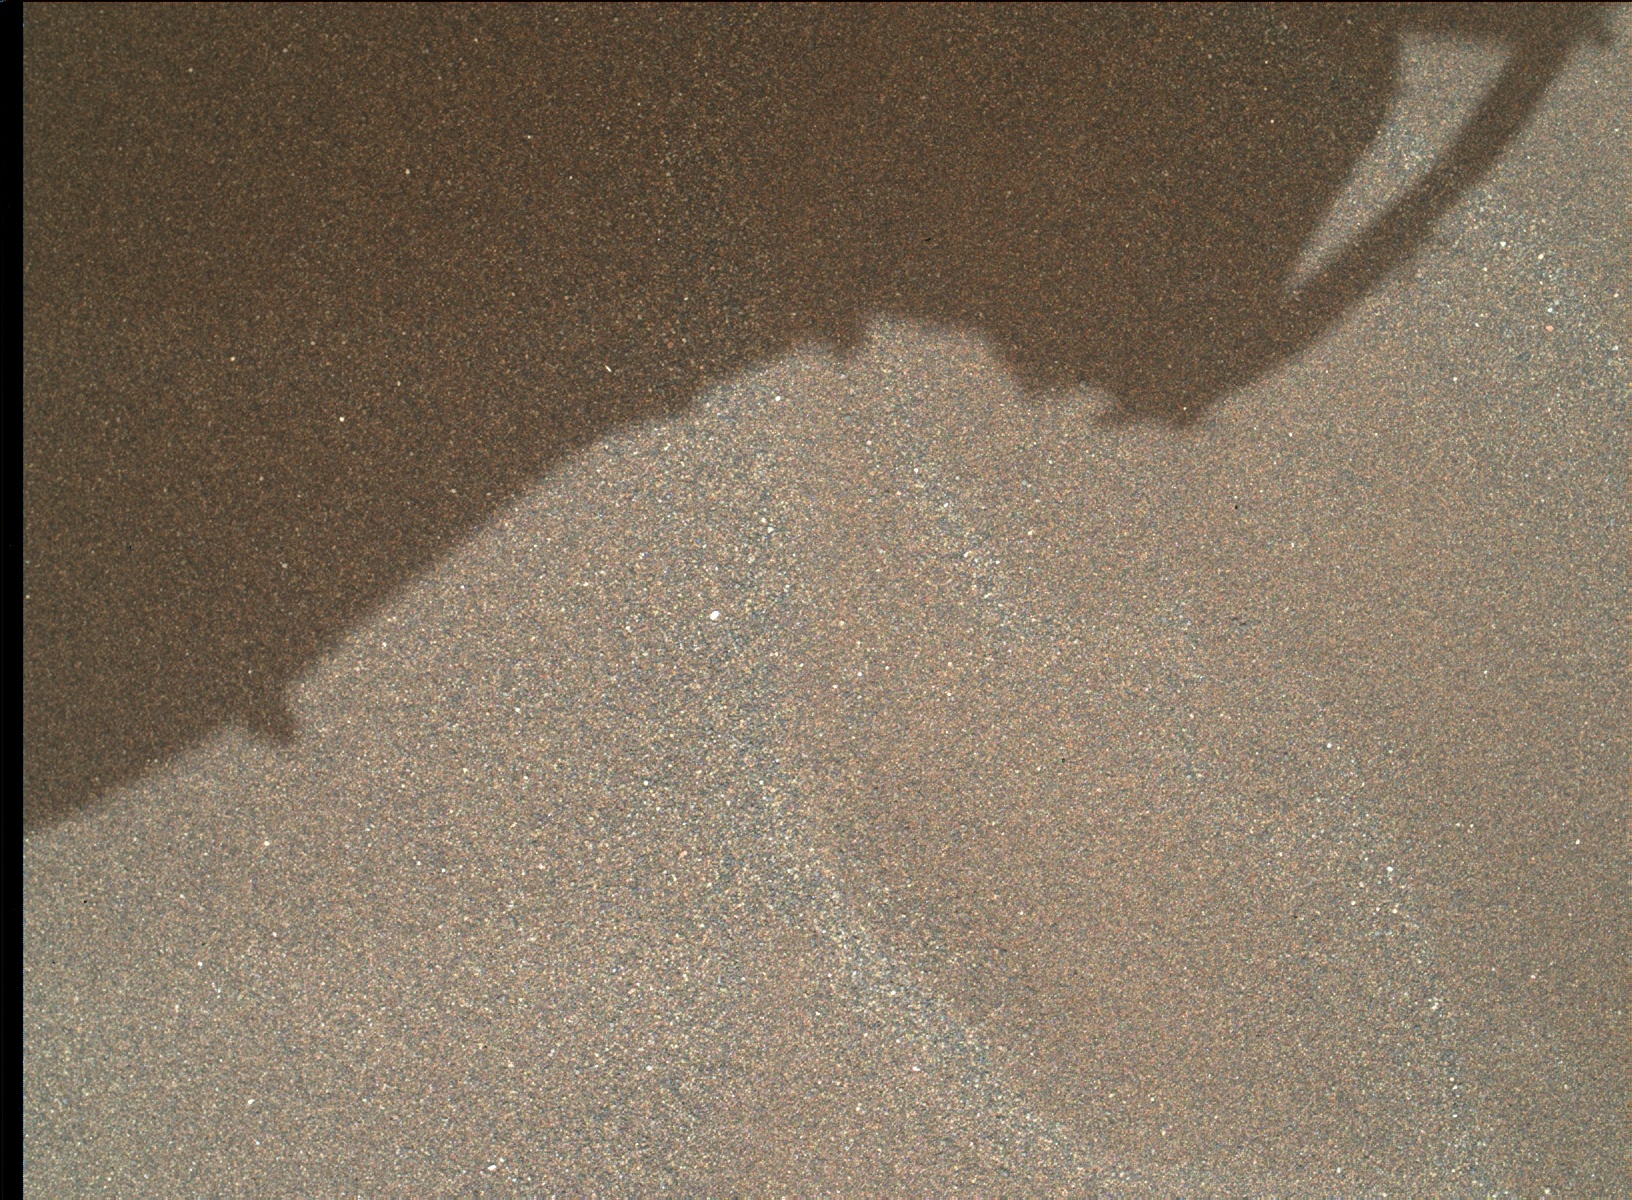 Nasa's Mars rover Curiosity acquired this image using its Mars Hand Lens Imager (MAHLI) on Sol 1602